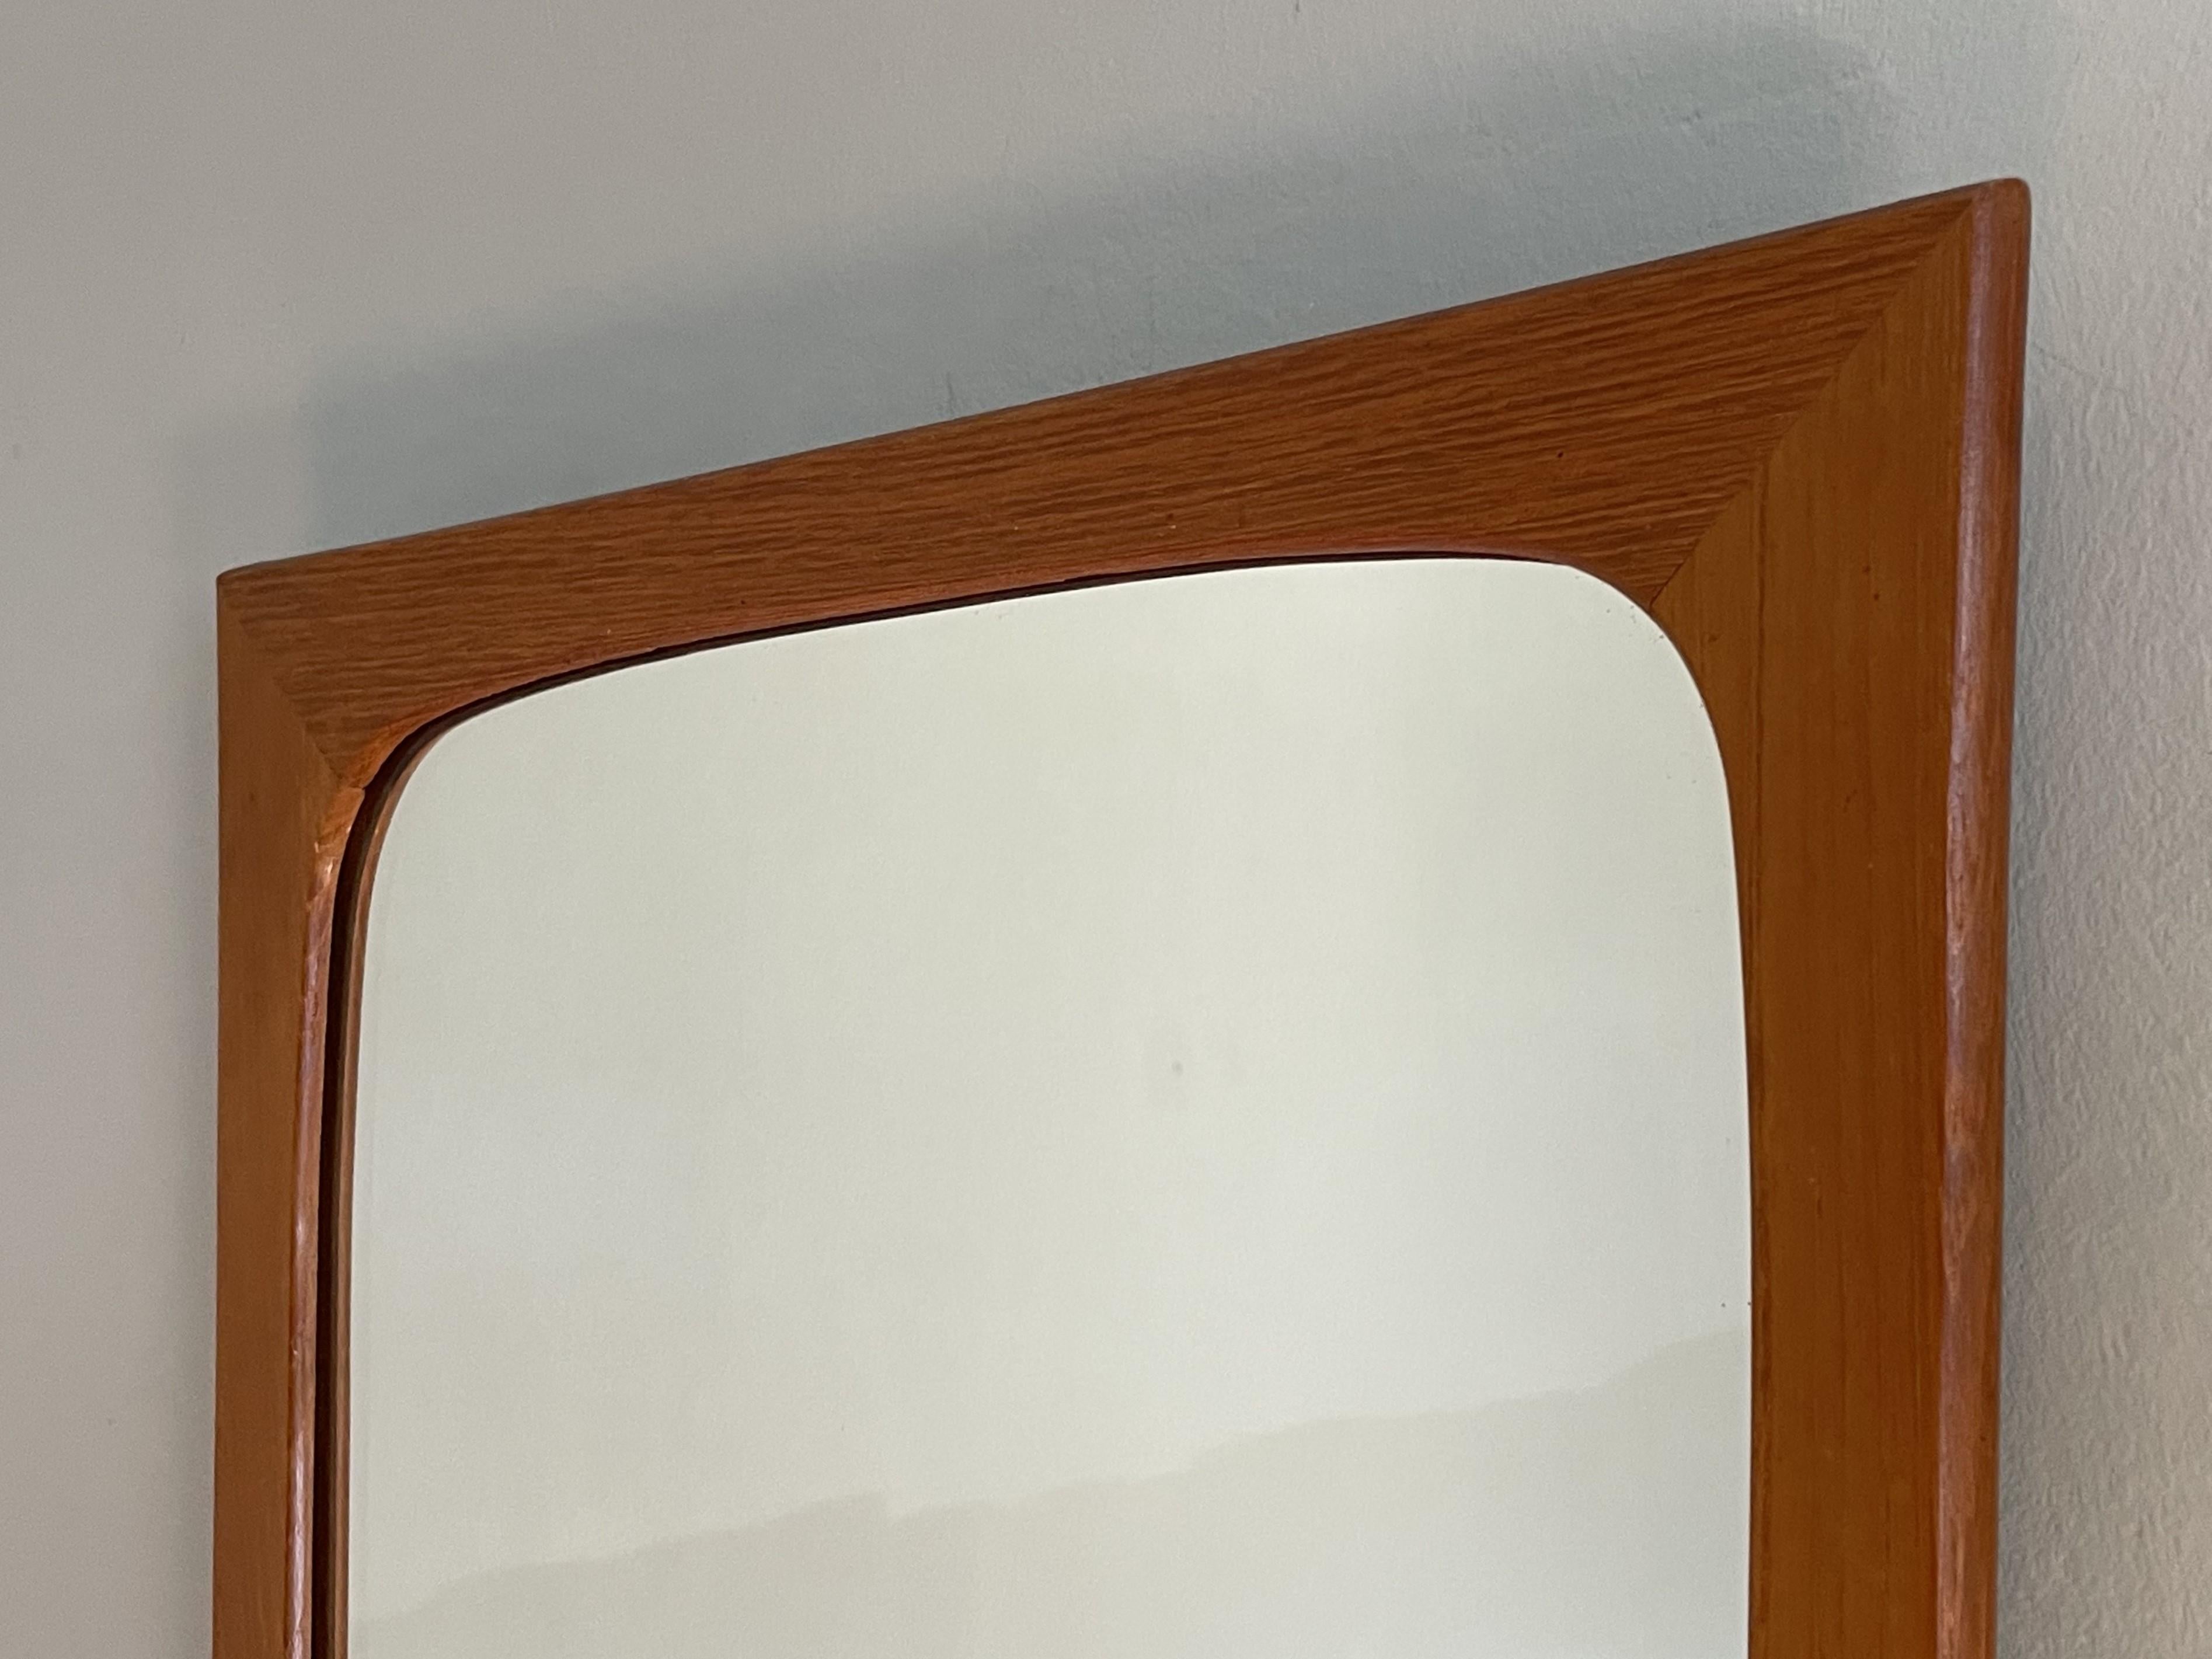 Hand-Crafted Rare Mid-Century Modern Wall / Make Up Mirror in Superb Teak Wooden Frame 1960s For Sale